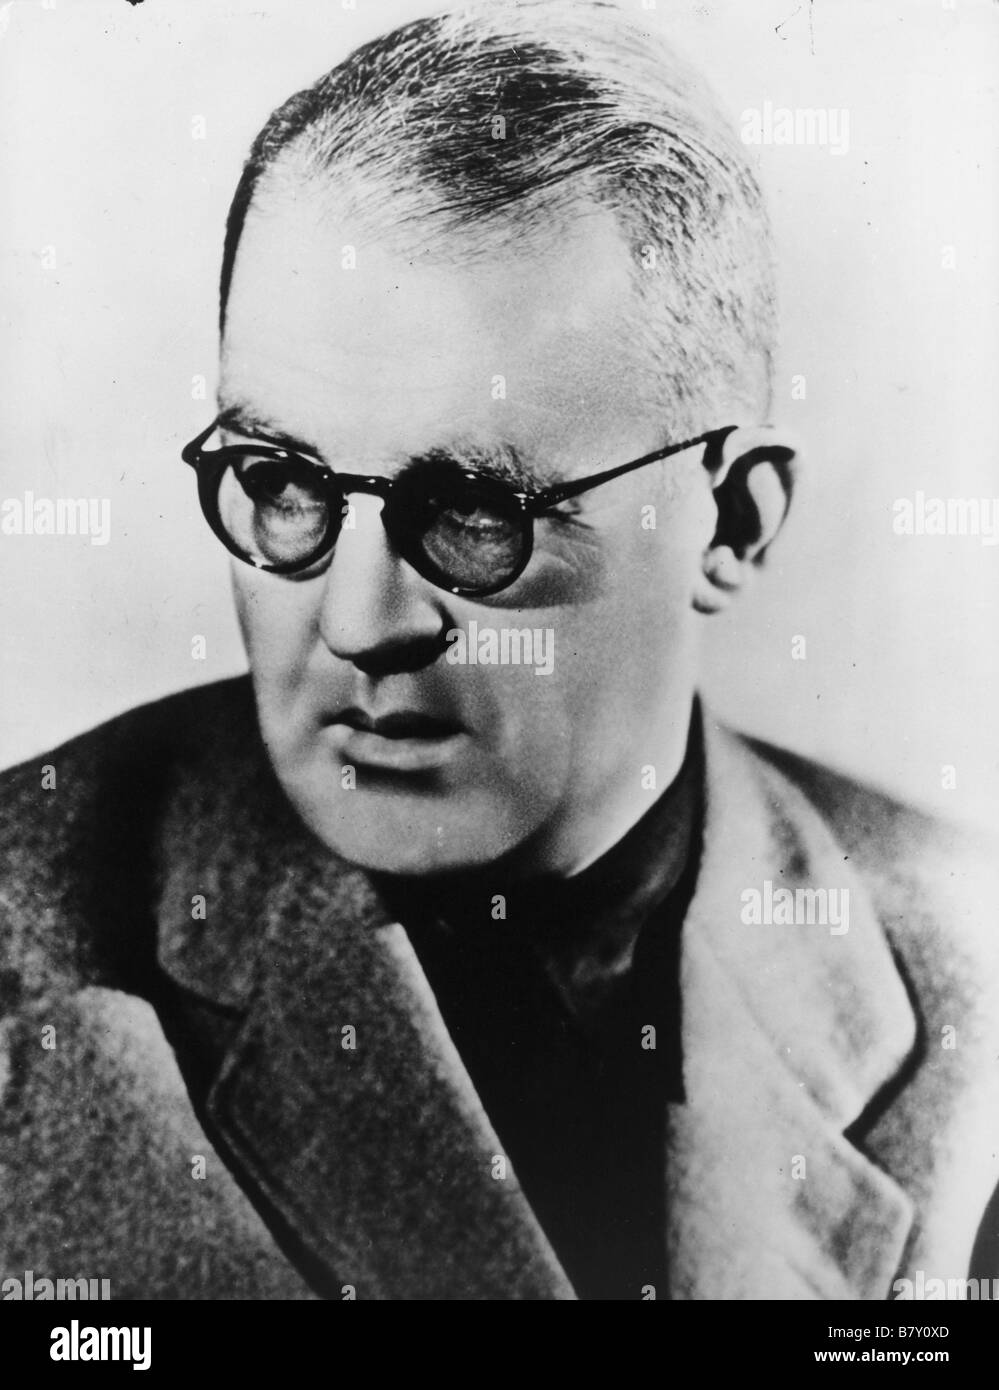 John Ford legendary film director in this 1930's portrait 8x10 Photo 